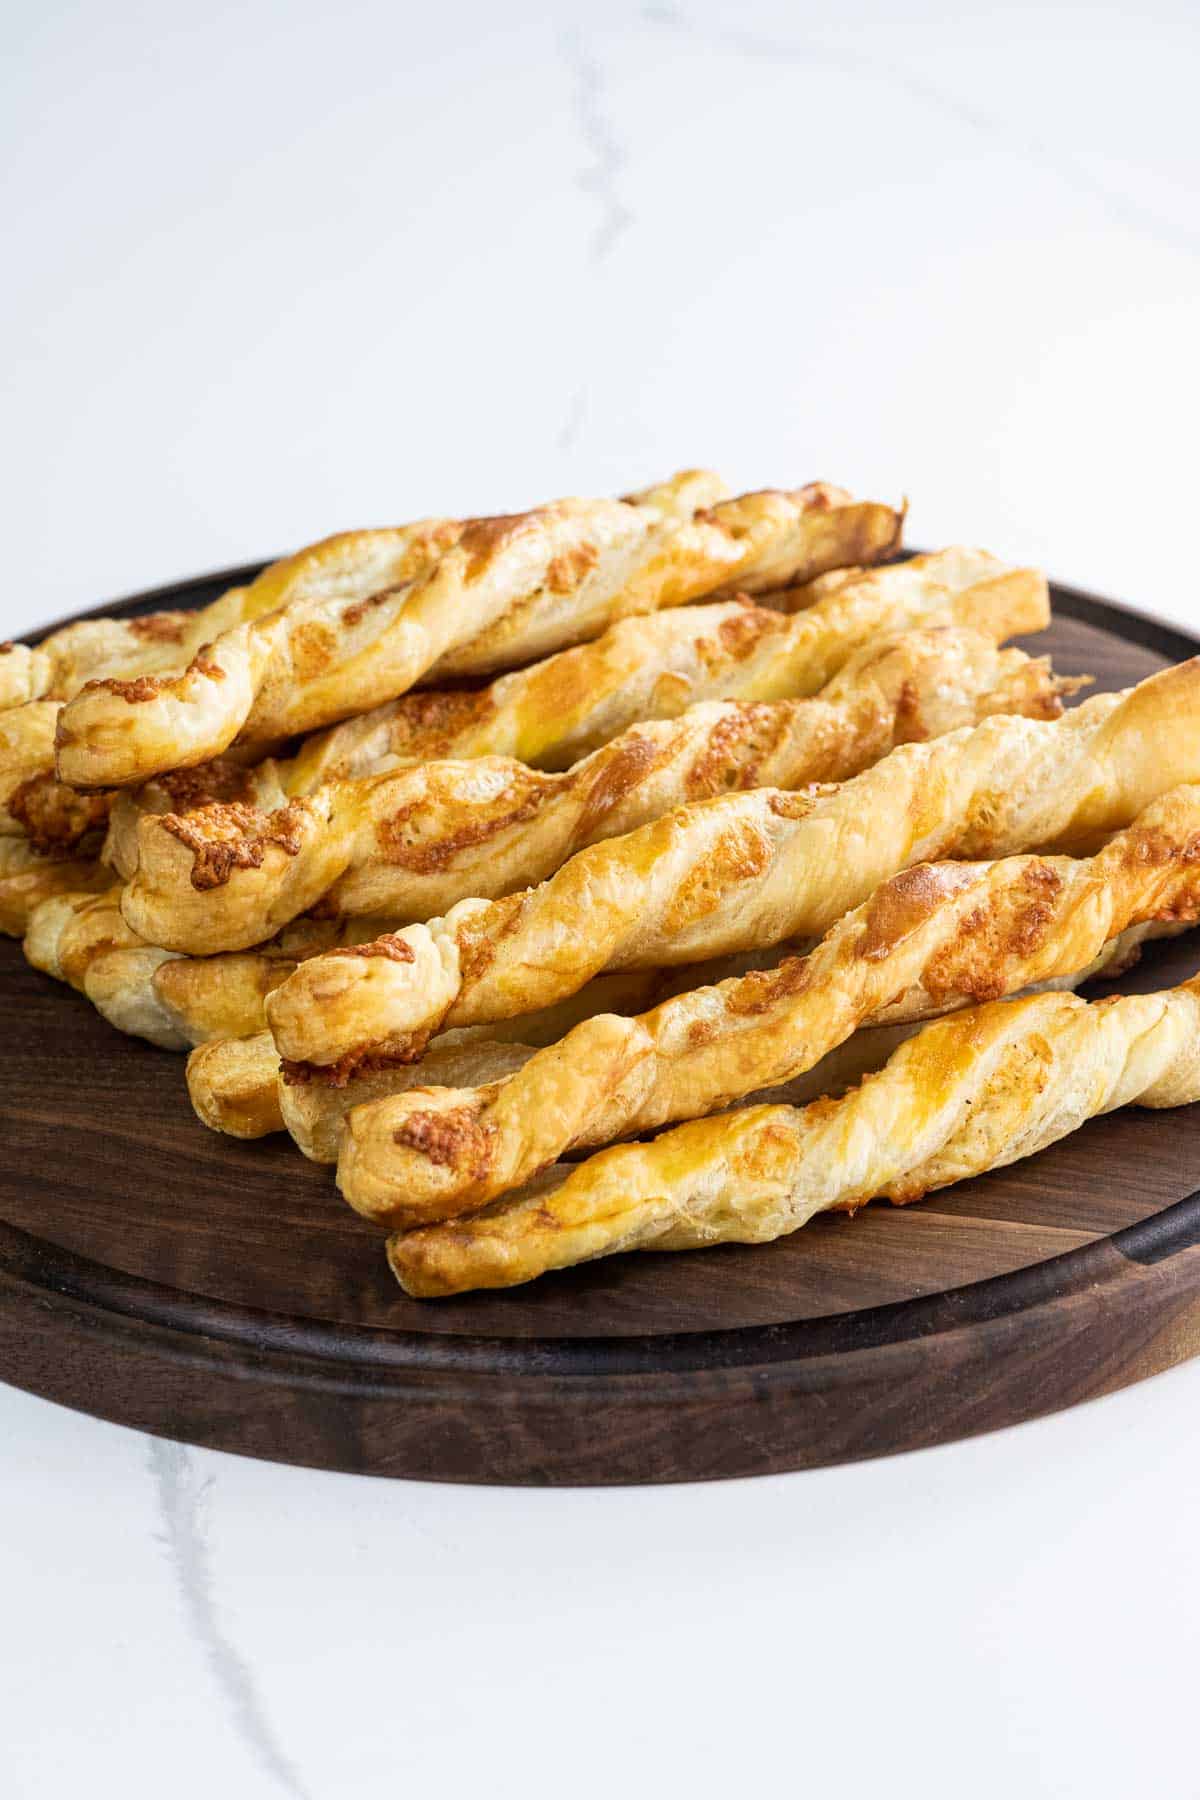 puff pastry cheese straws on a wooden board